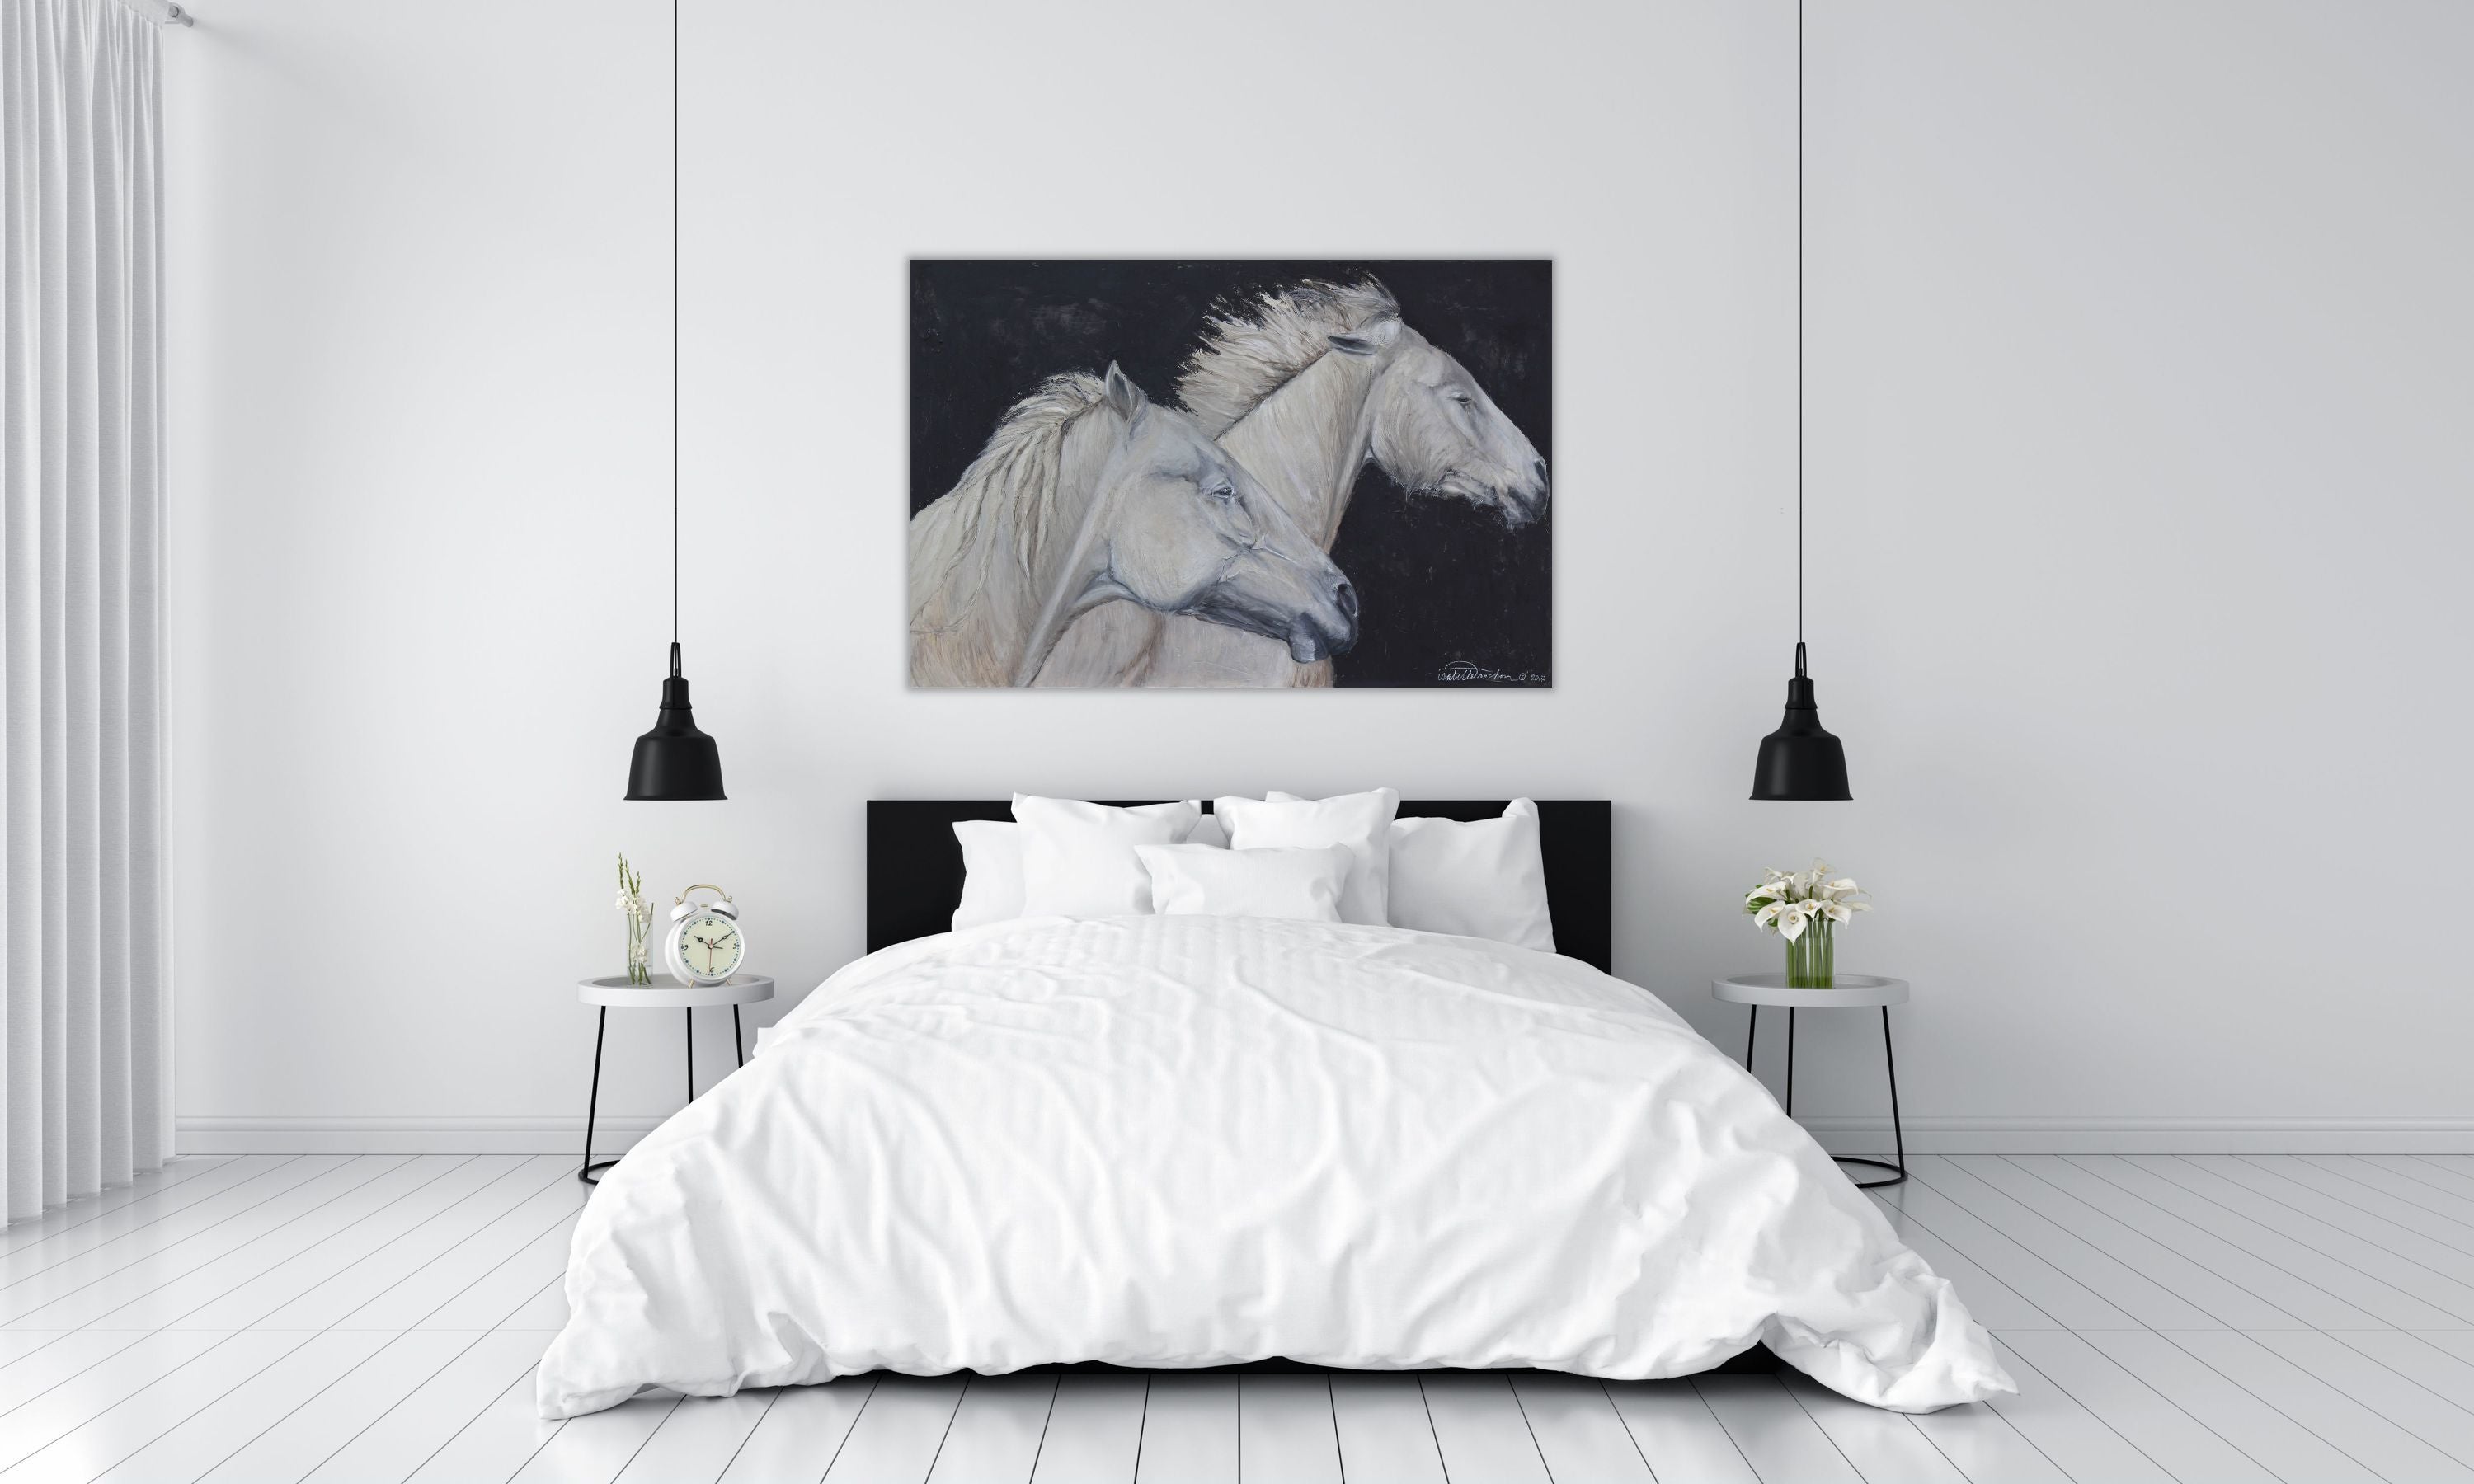 The mighty horses of the Camargue galloping in unison, happy to be alive in their beautiful natural habitat. This painting was created using oil sticks and is highly textured. The energy of the horses jumps from the canvas, a stunning and dramatic piece.